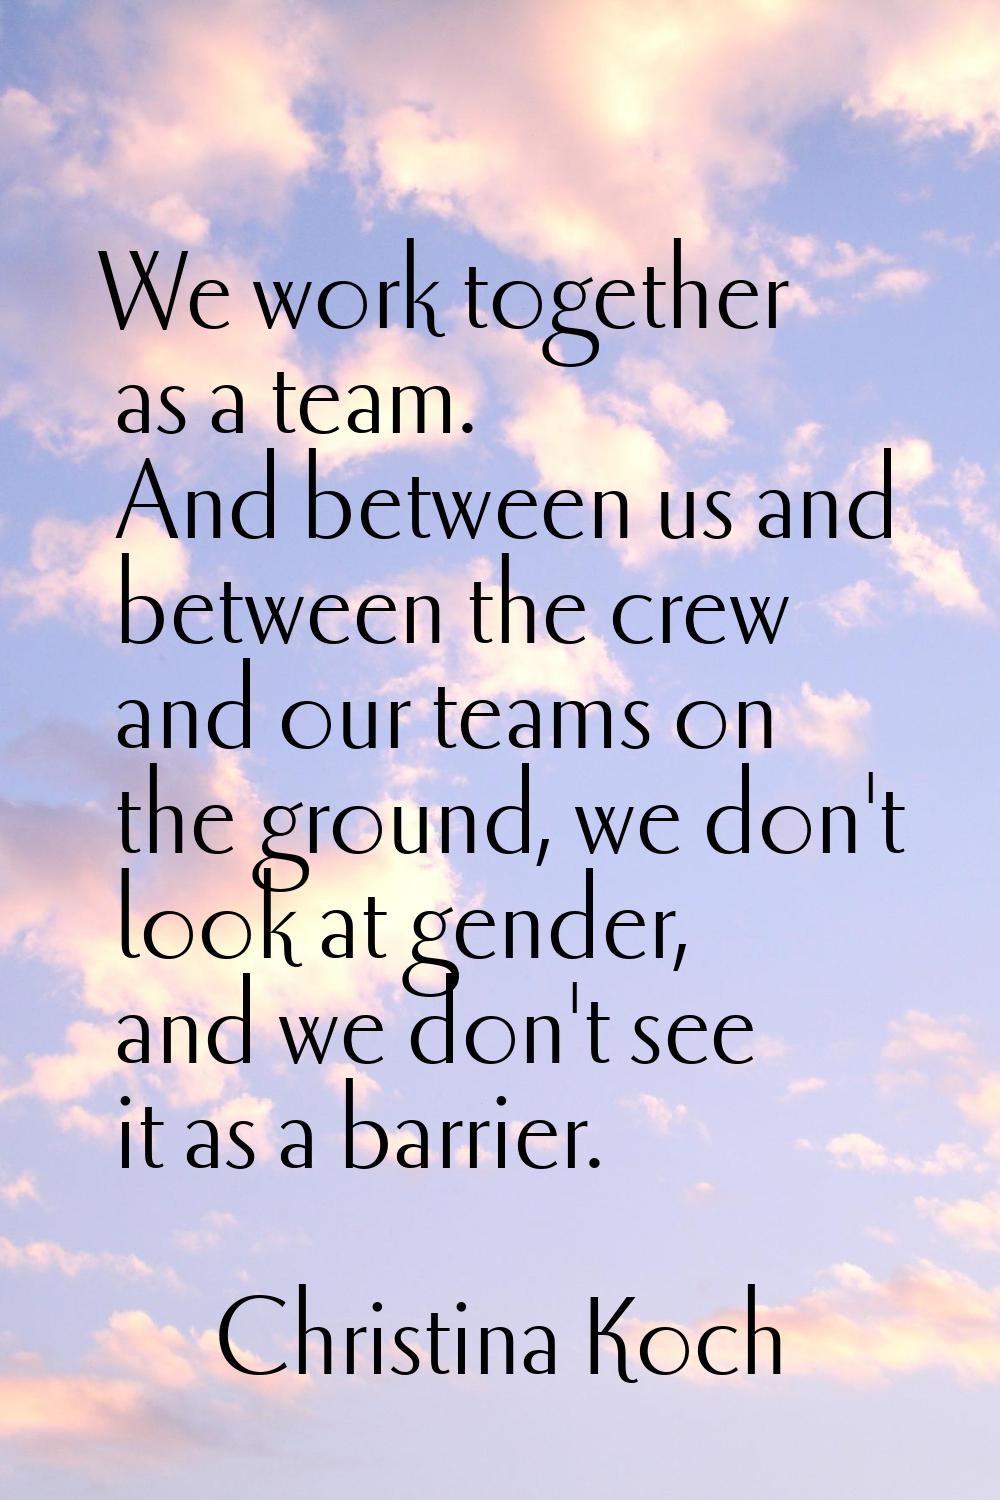 We work together as a team. And between us and between the crew and our teams on the ground, we don